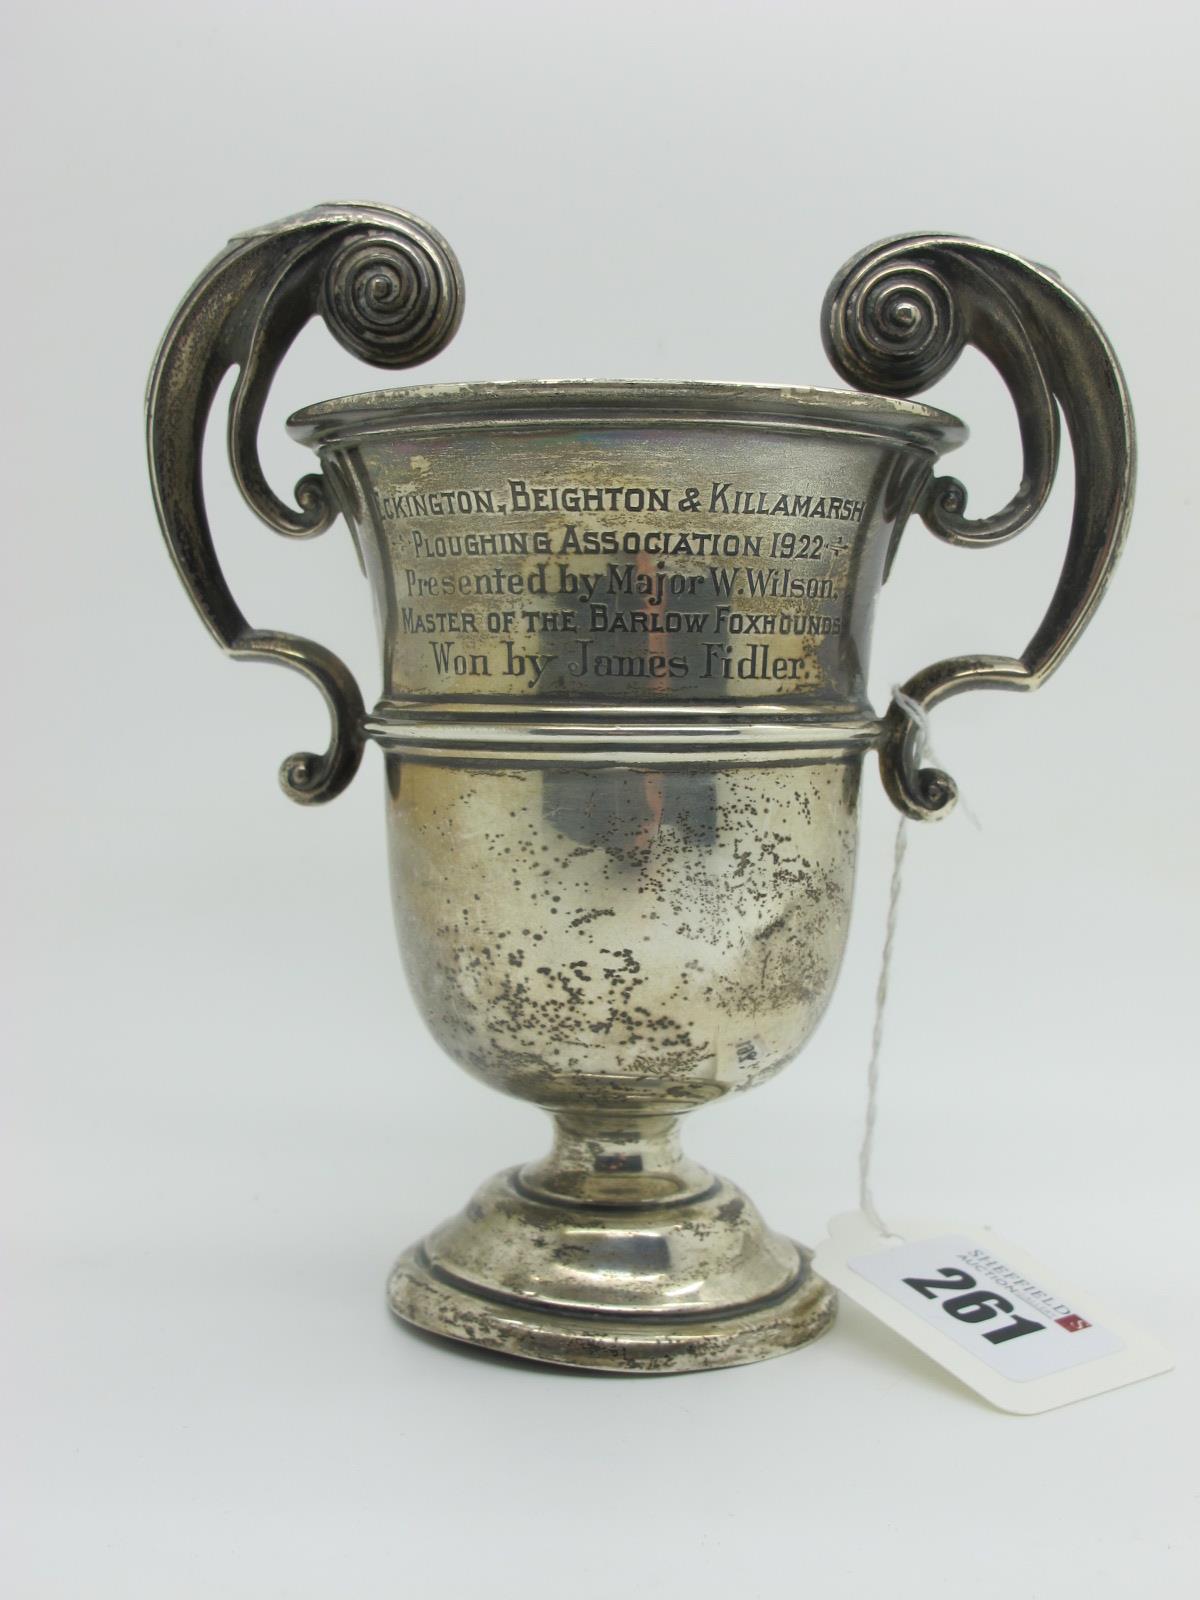 A Hallmarked Silver Twin Handled Trophy Cup, Walker & Hall, Sheffield 1922, engraved "Eckington,